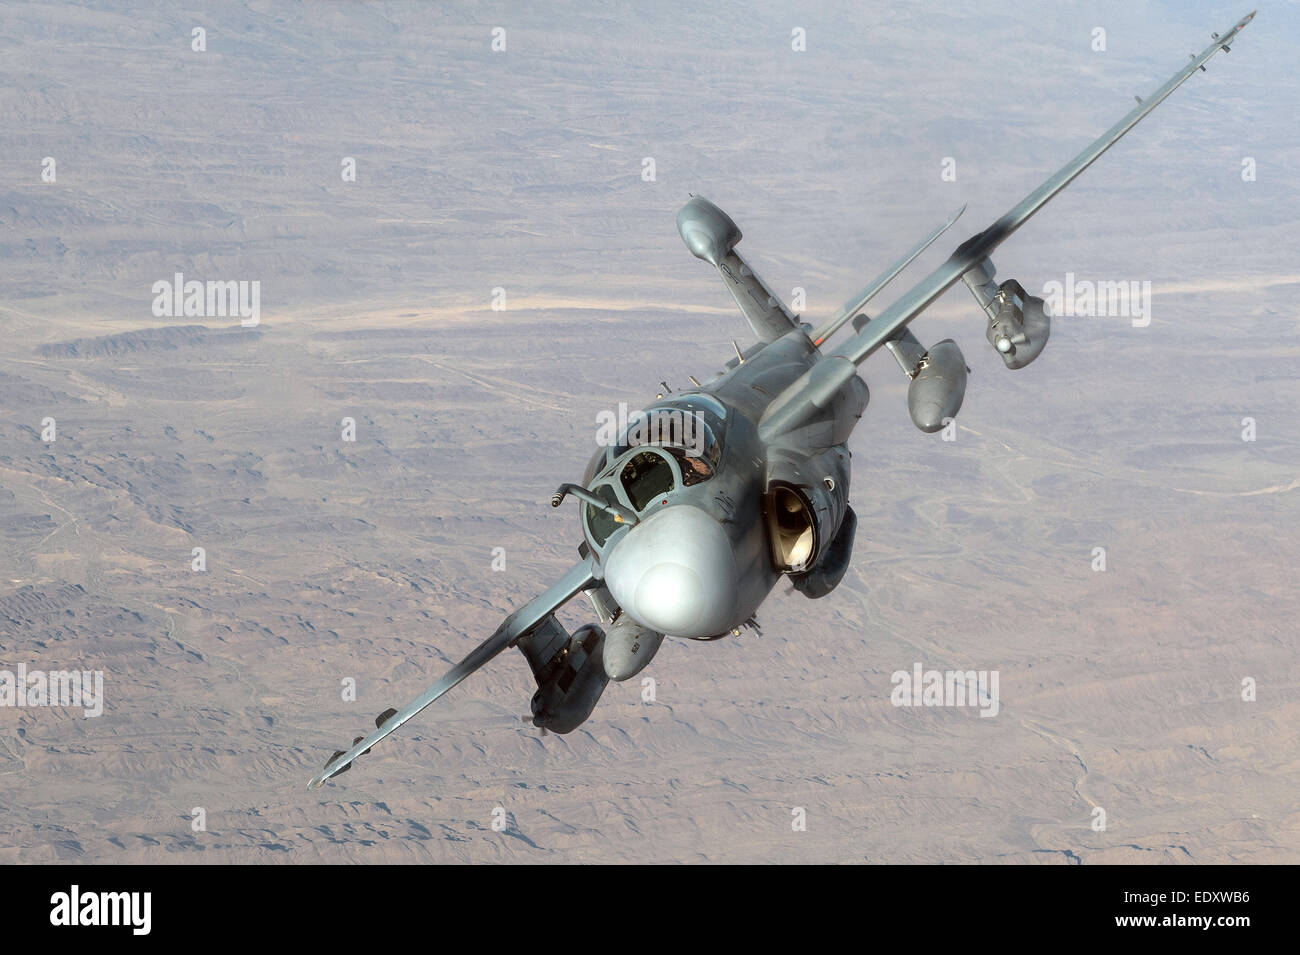 A US Marine Corps Prowler electronic attack aircraft banks sharply during a mission over Afghanistan December 30, 2014. Stock Photo